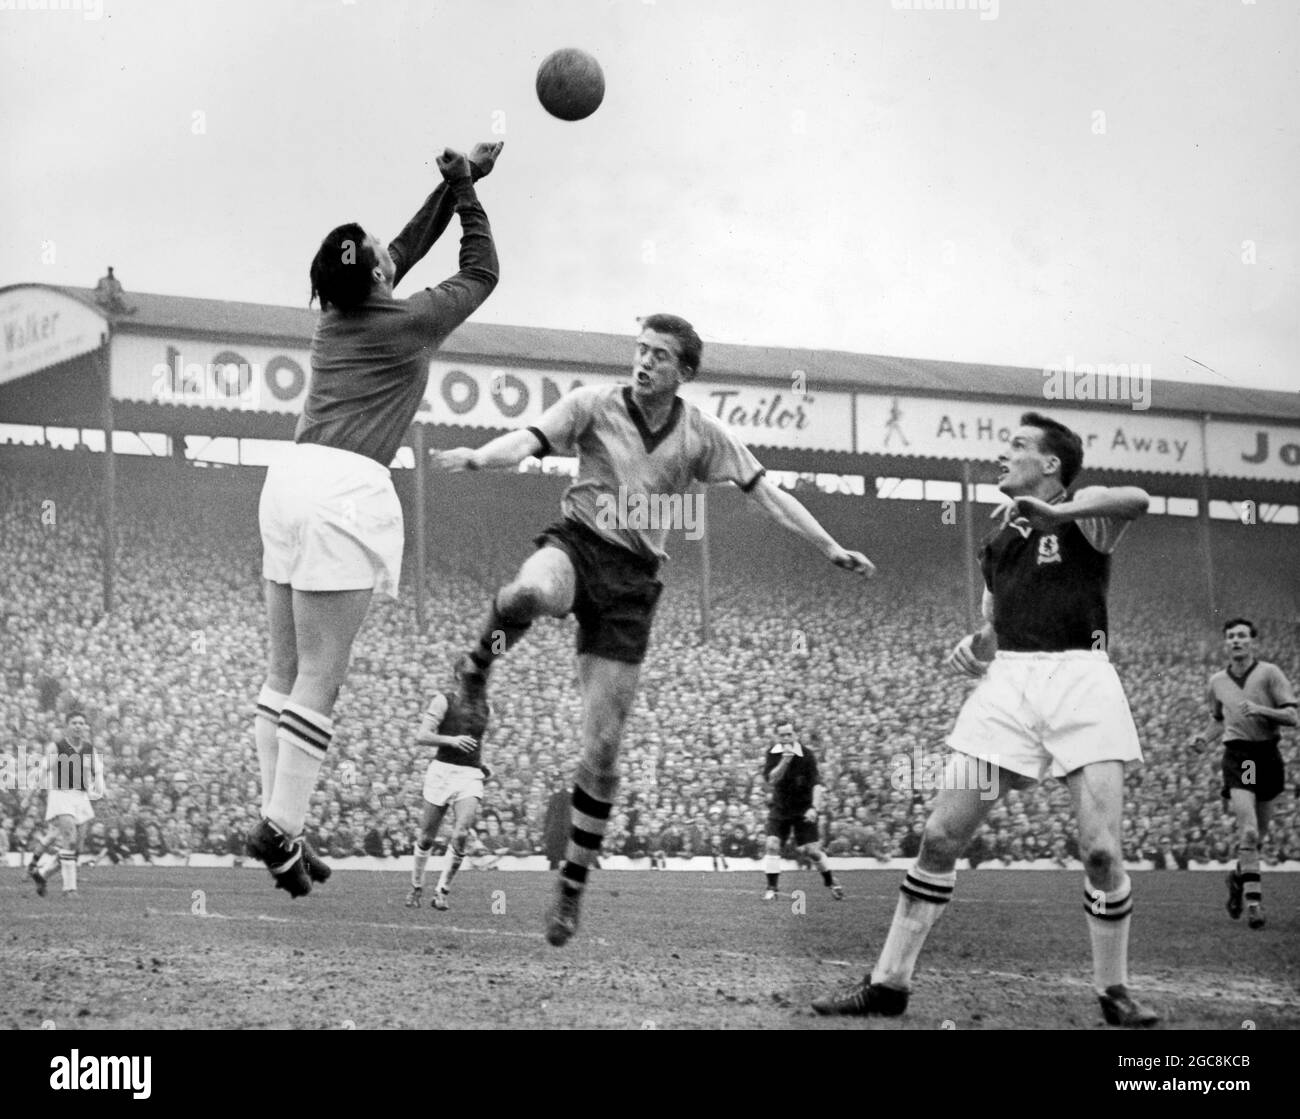 FA Cup semi final at the Hawthorns 26/3/1960 Wolverhampton Wanderers v Aston Villa. Footballer Peter Broadbent challenges goalkeeper Nigel Sims watched by Vic Crowe and Jimmy Murray. Football match action 1960s Stock Photo